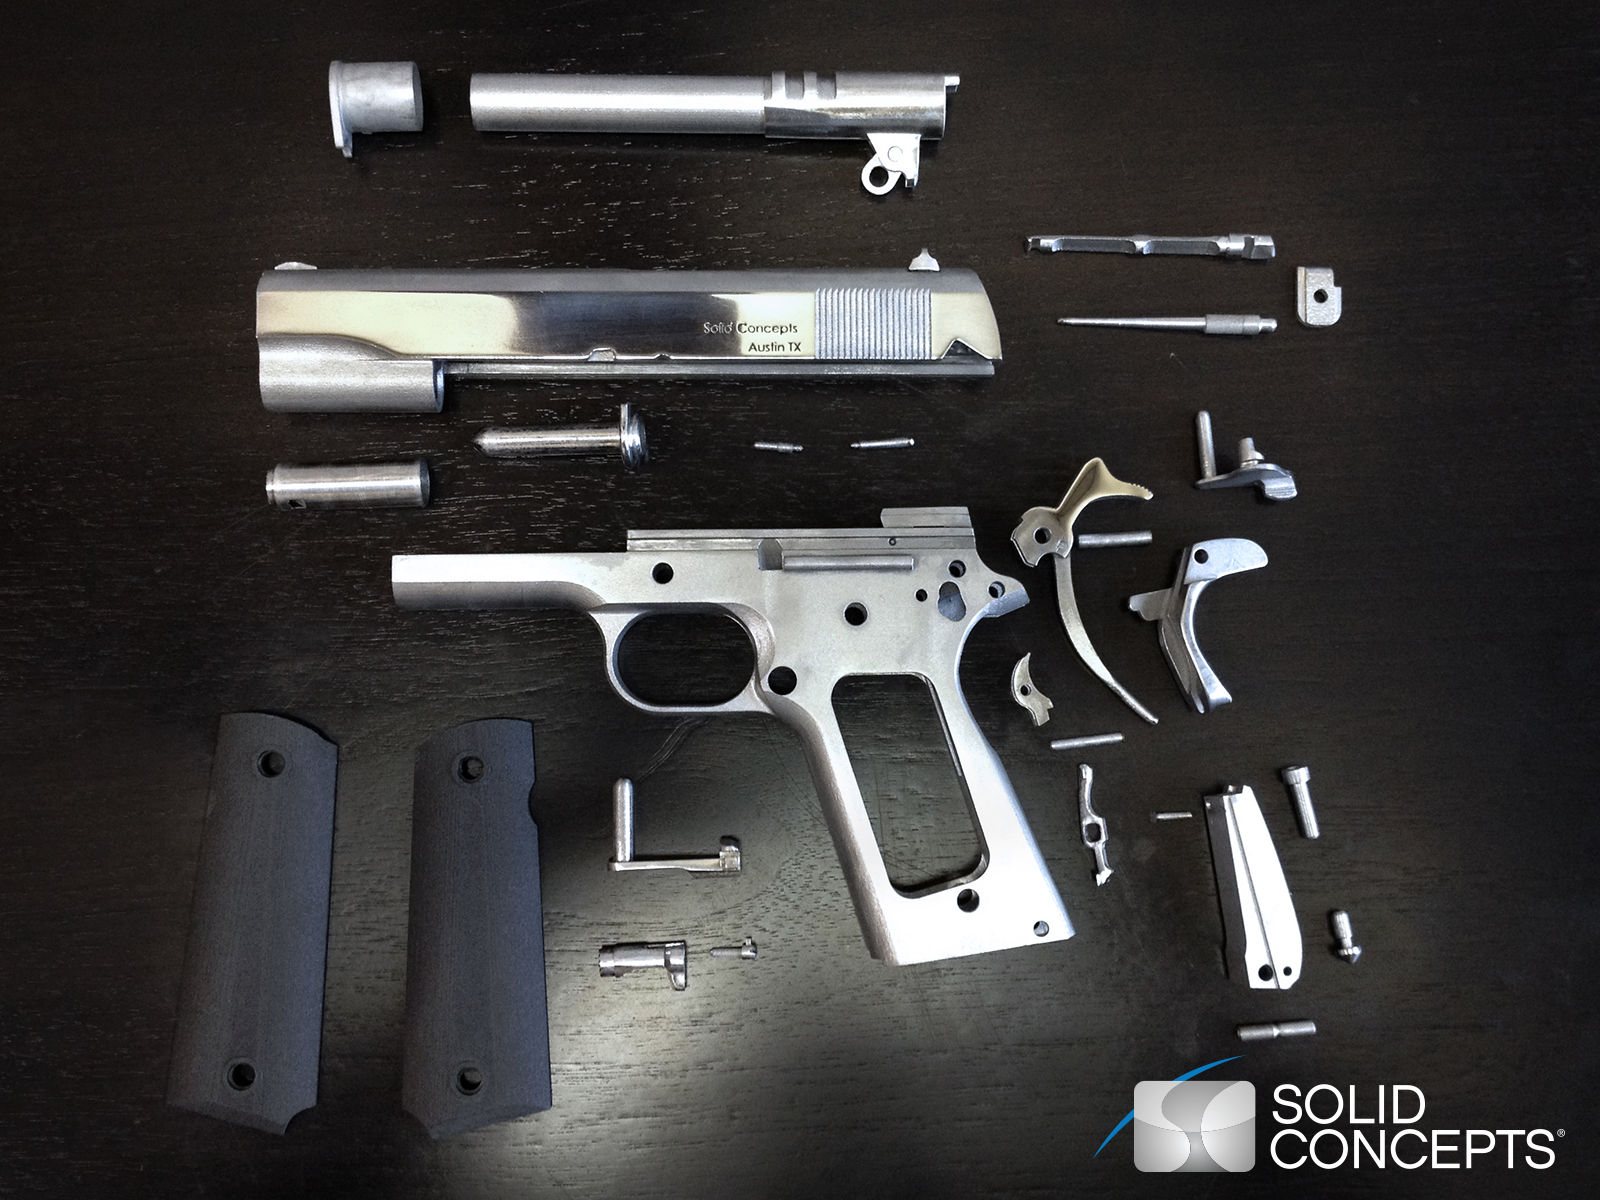 3D Printed Metal Gun made by Solid Concepts